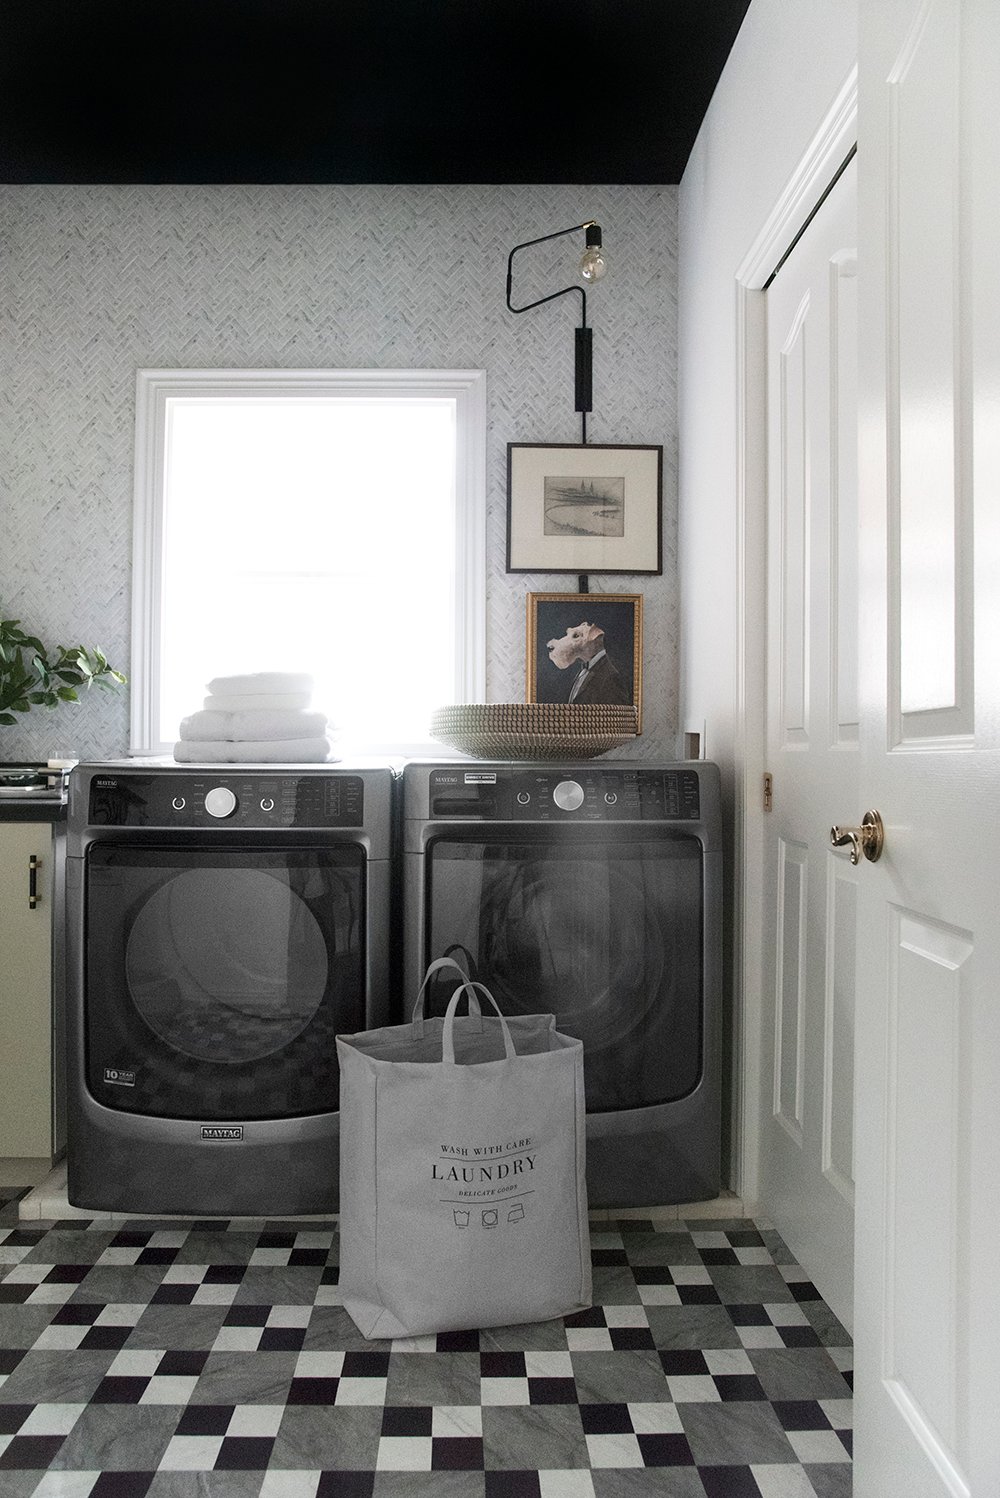 Budget Friendly Laundry Room Makeover - roomfortuesday.com